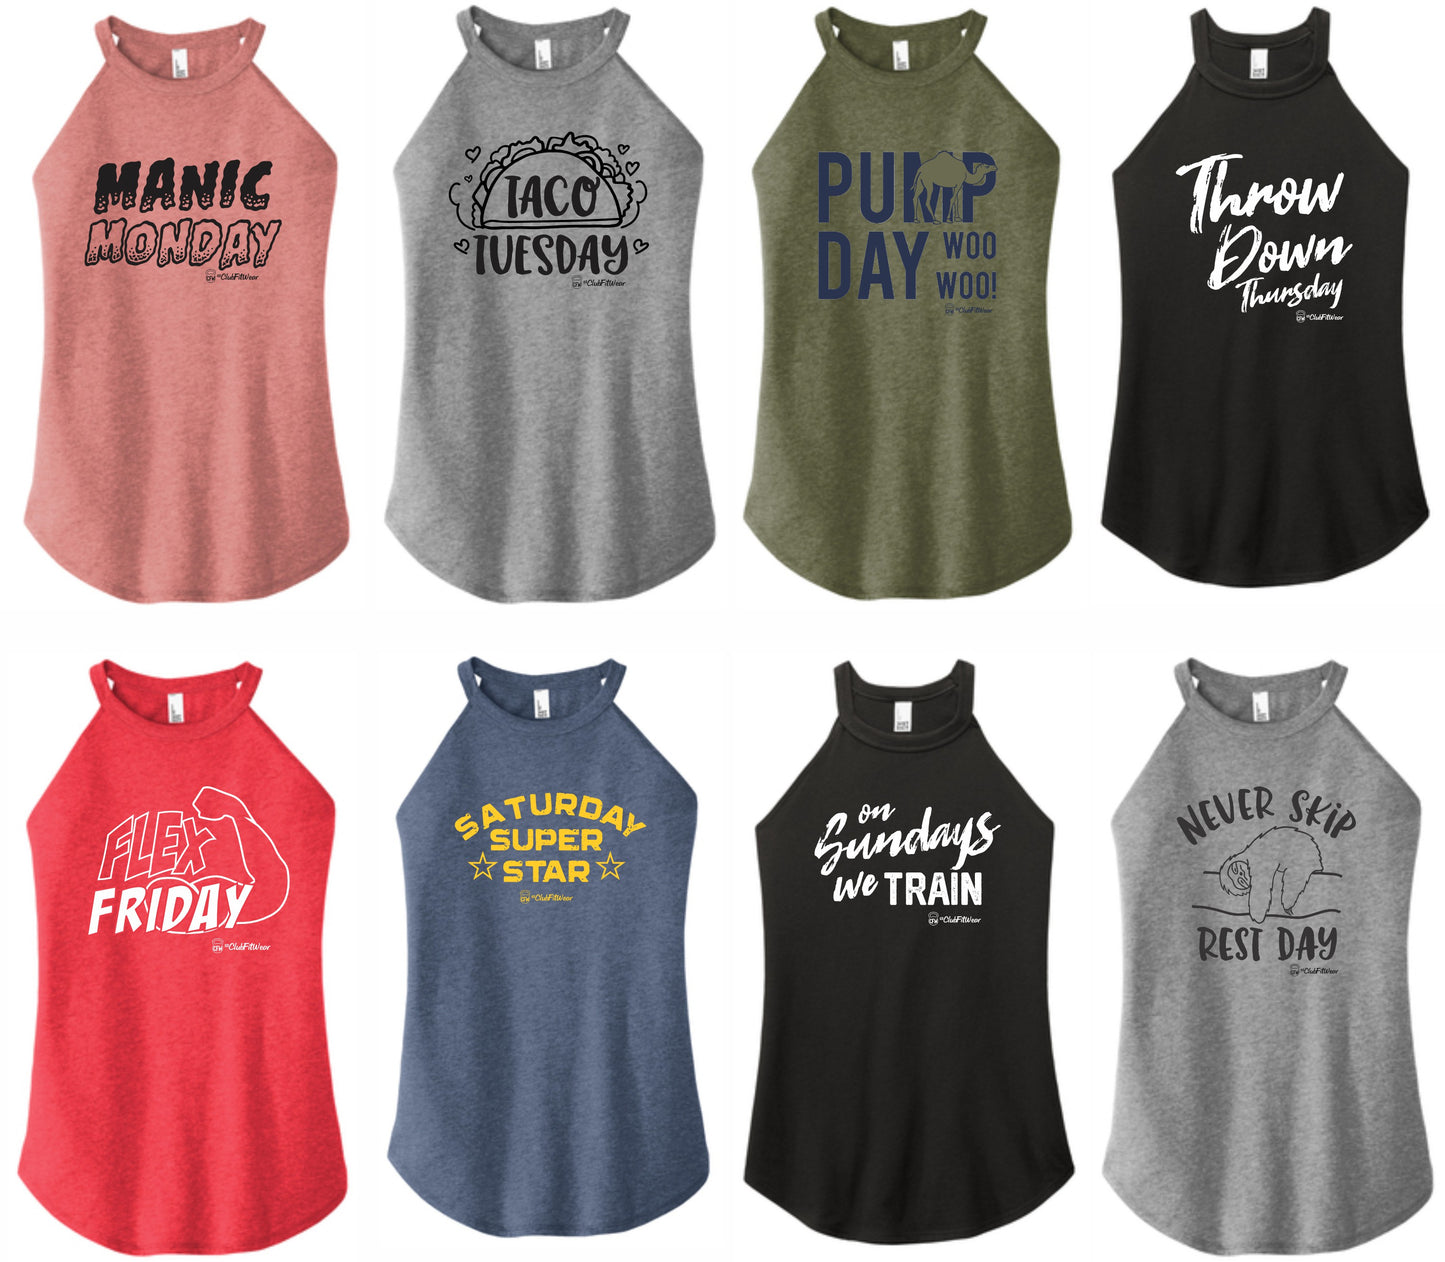 Days of the Week Rocker Tanks (Second Week) Pick your Day!